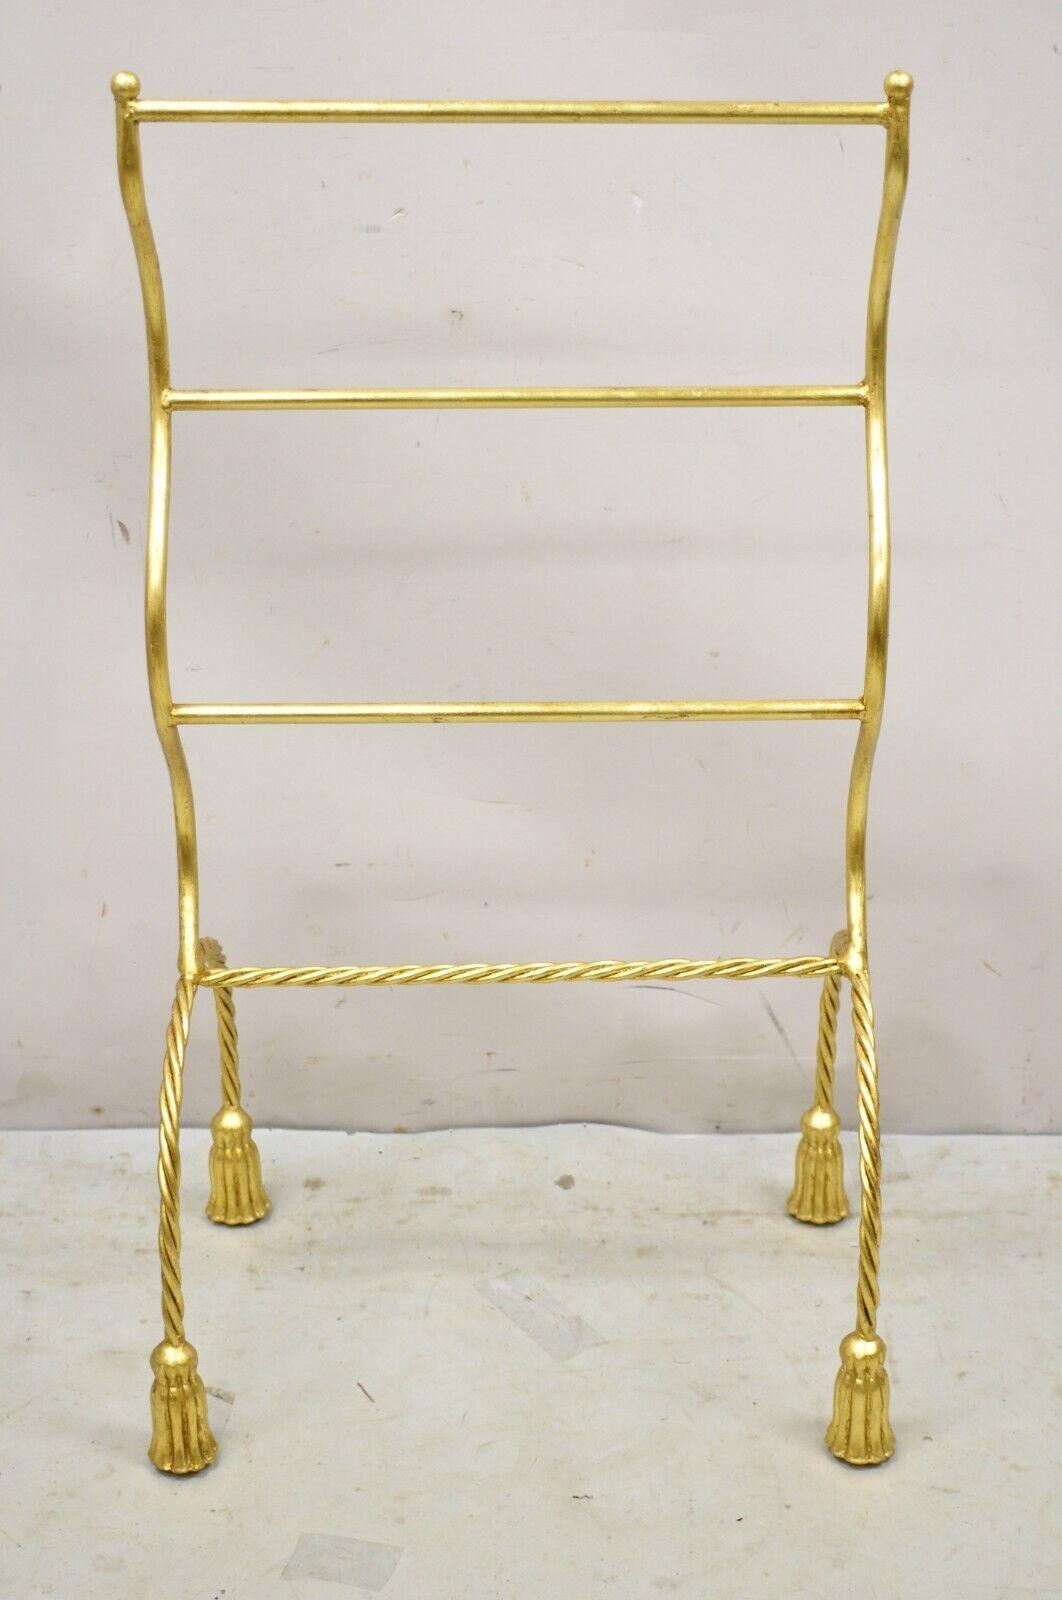 Vintage Italian Hollywood Regency Gold Gilt Metal Iron Towel Rack with Tassel Feet. Item features a gold gilt finish, sculptural metal frame, tassel form feet, quality Italian craftsmanship, great style and form. Circa Mid to Late 20th Century.